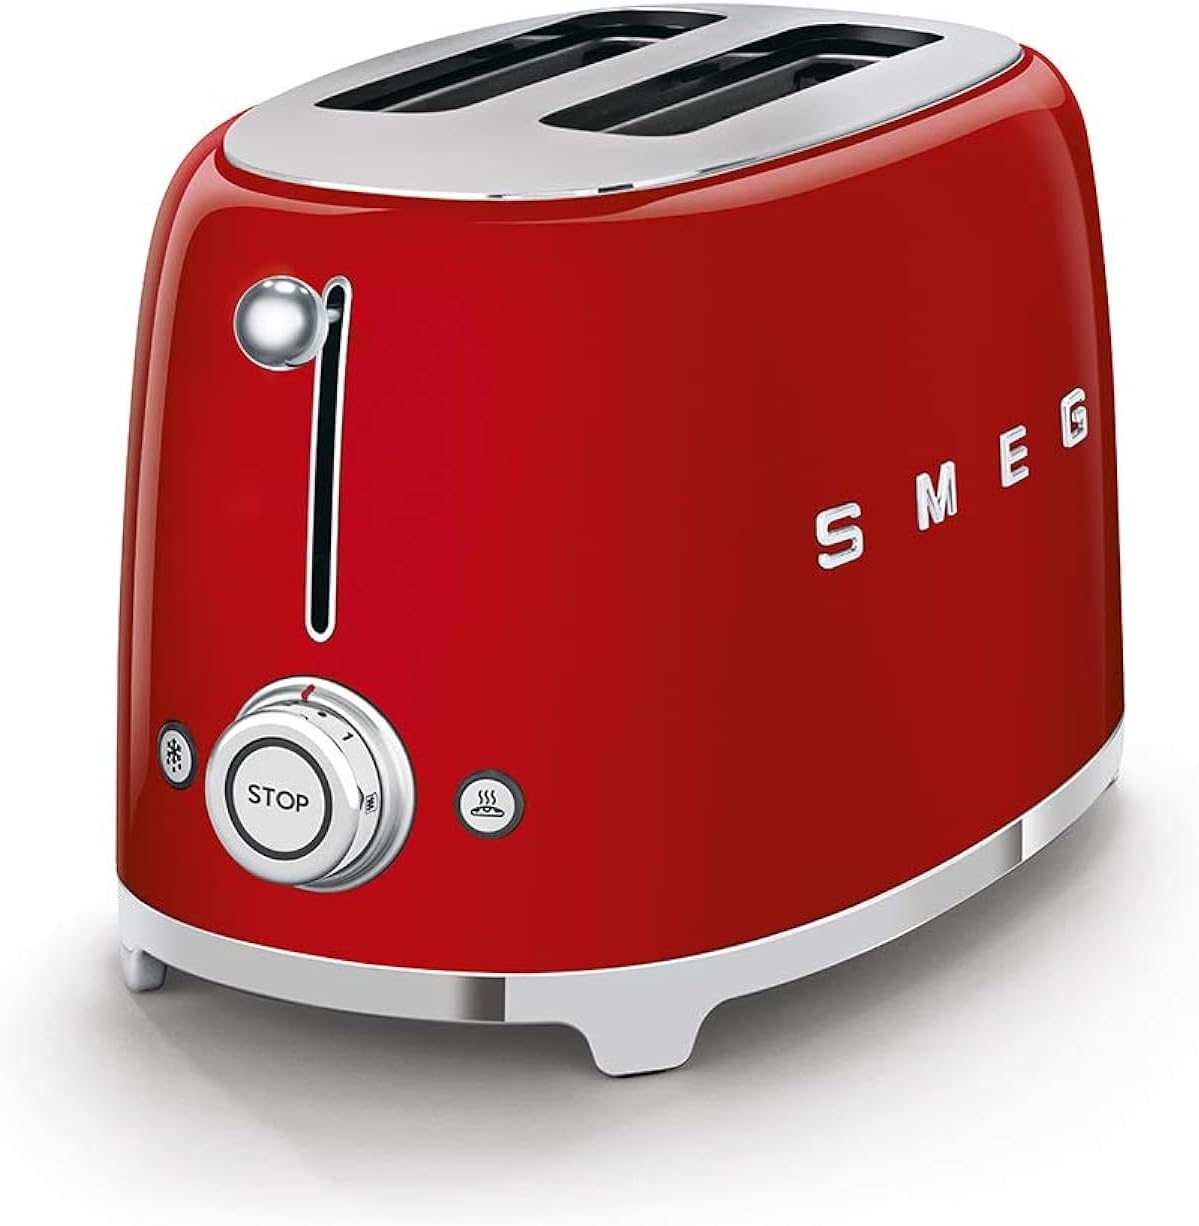 Smeg TSF01RDUK 2REBANADA (E) 950W RED - TOASTER (2 PIECES (S), Red, Stainless Steel, Buttons, Rotation, 950W, 220-240)